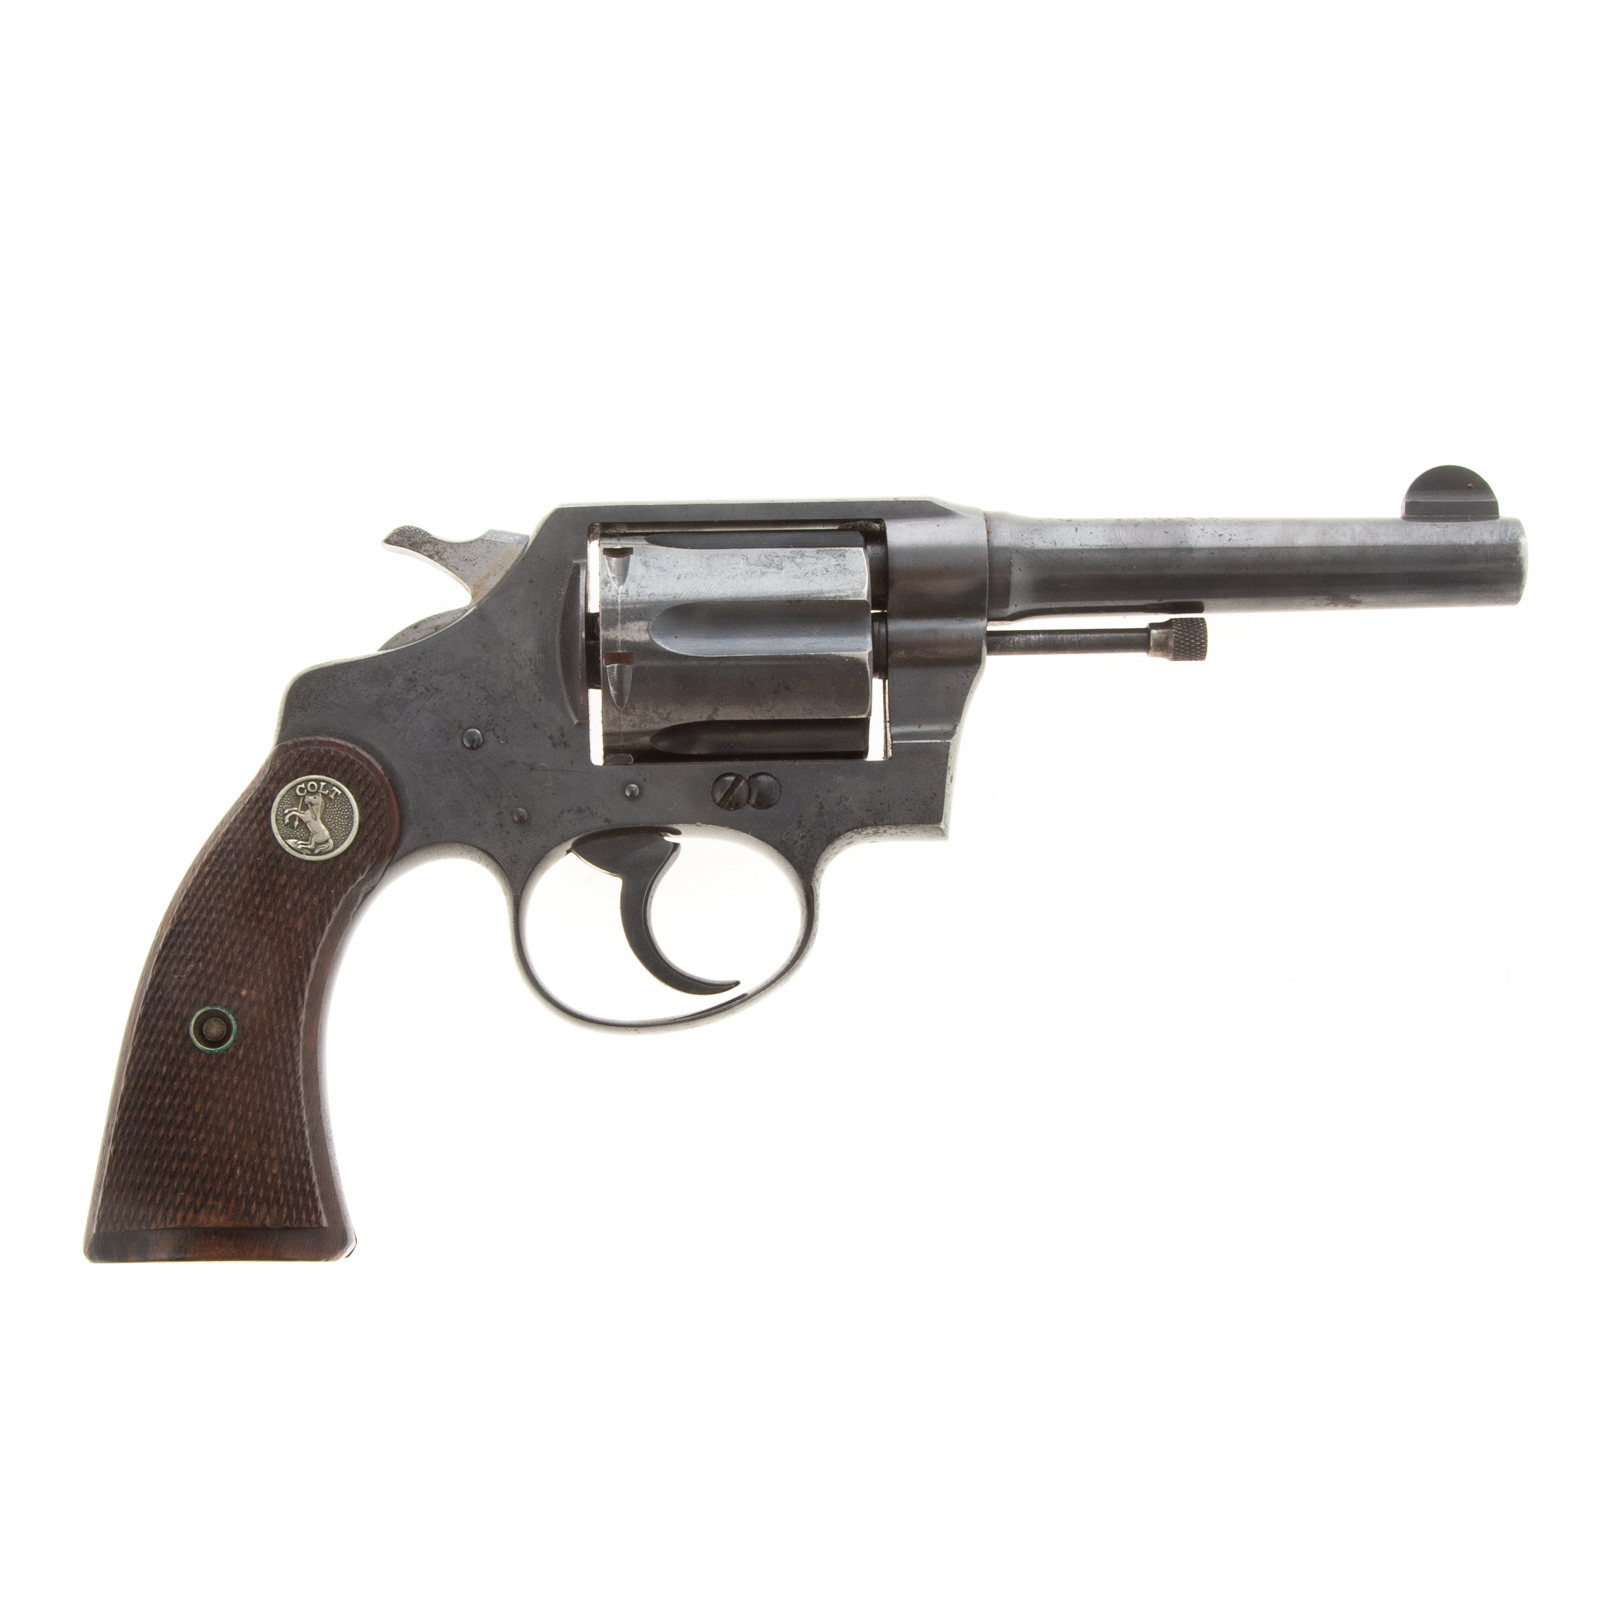 COLT POLICE POSITIVE 38 SPECIAL 33548b